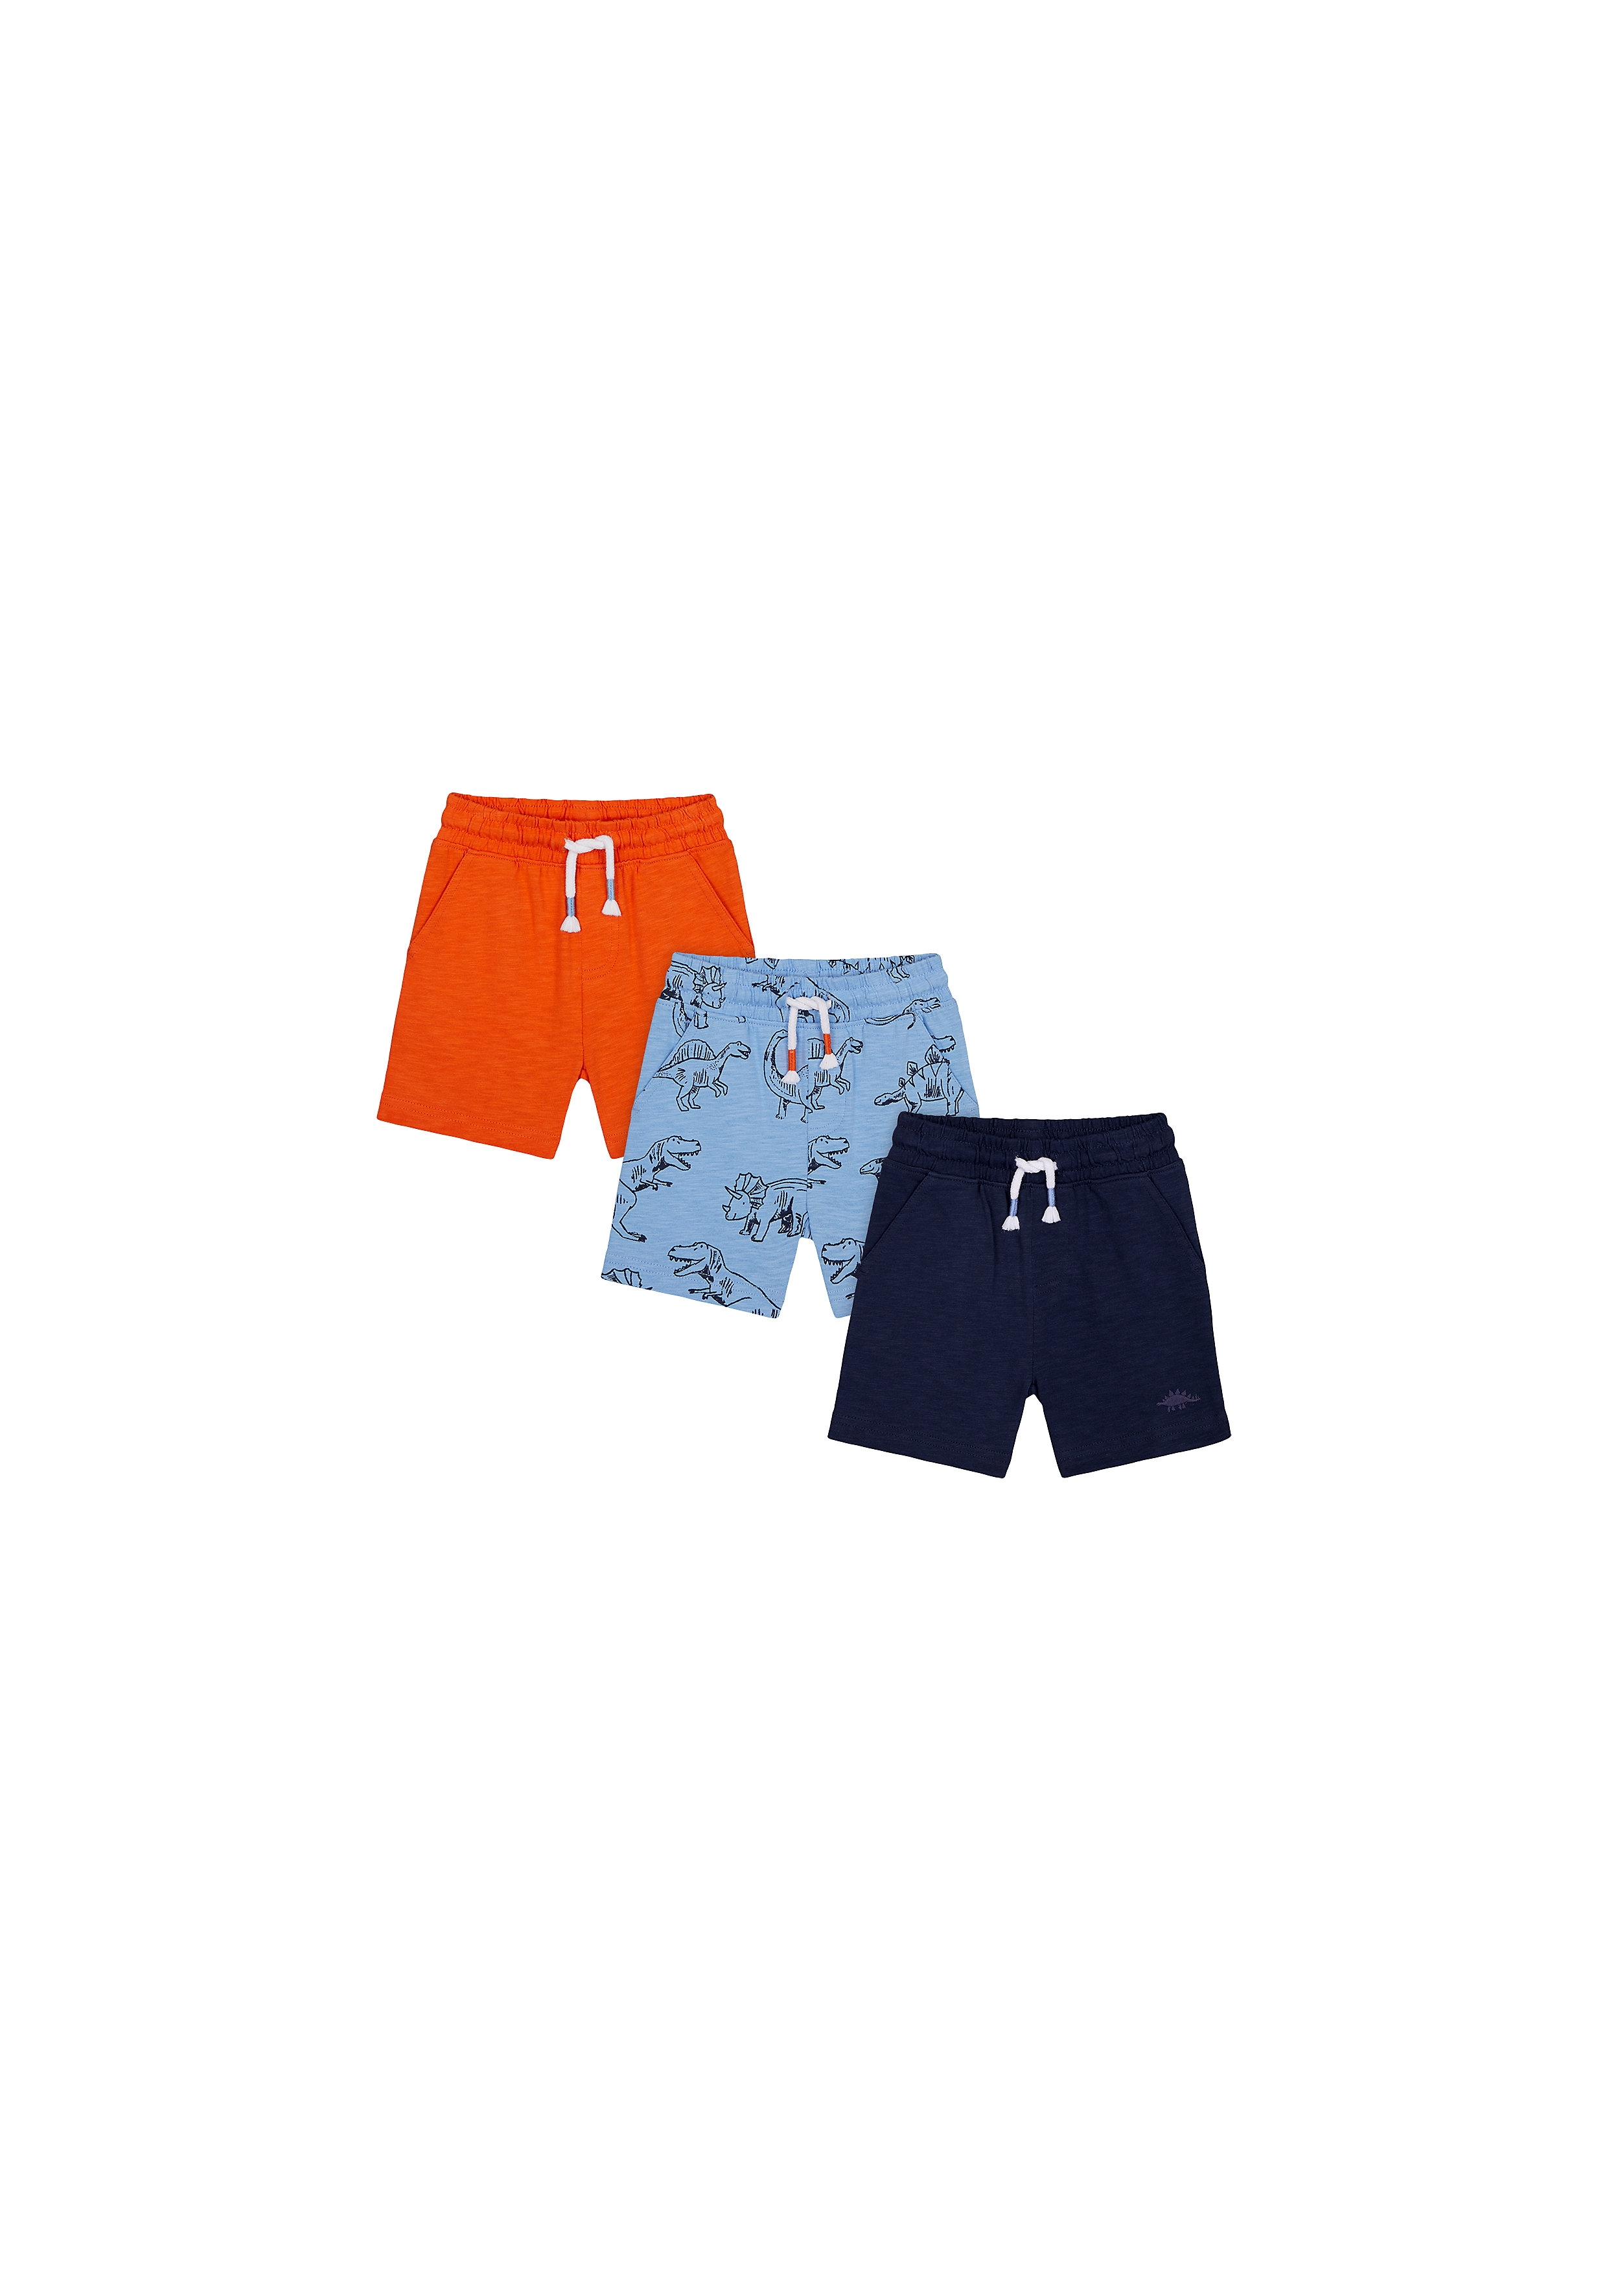 Boys Knitted Shorts Dino Print - Multicolor